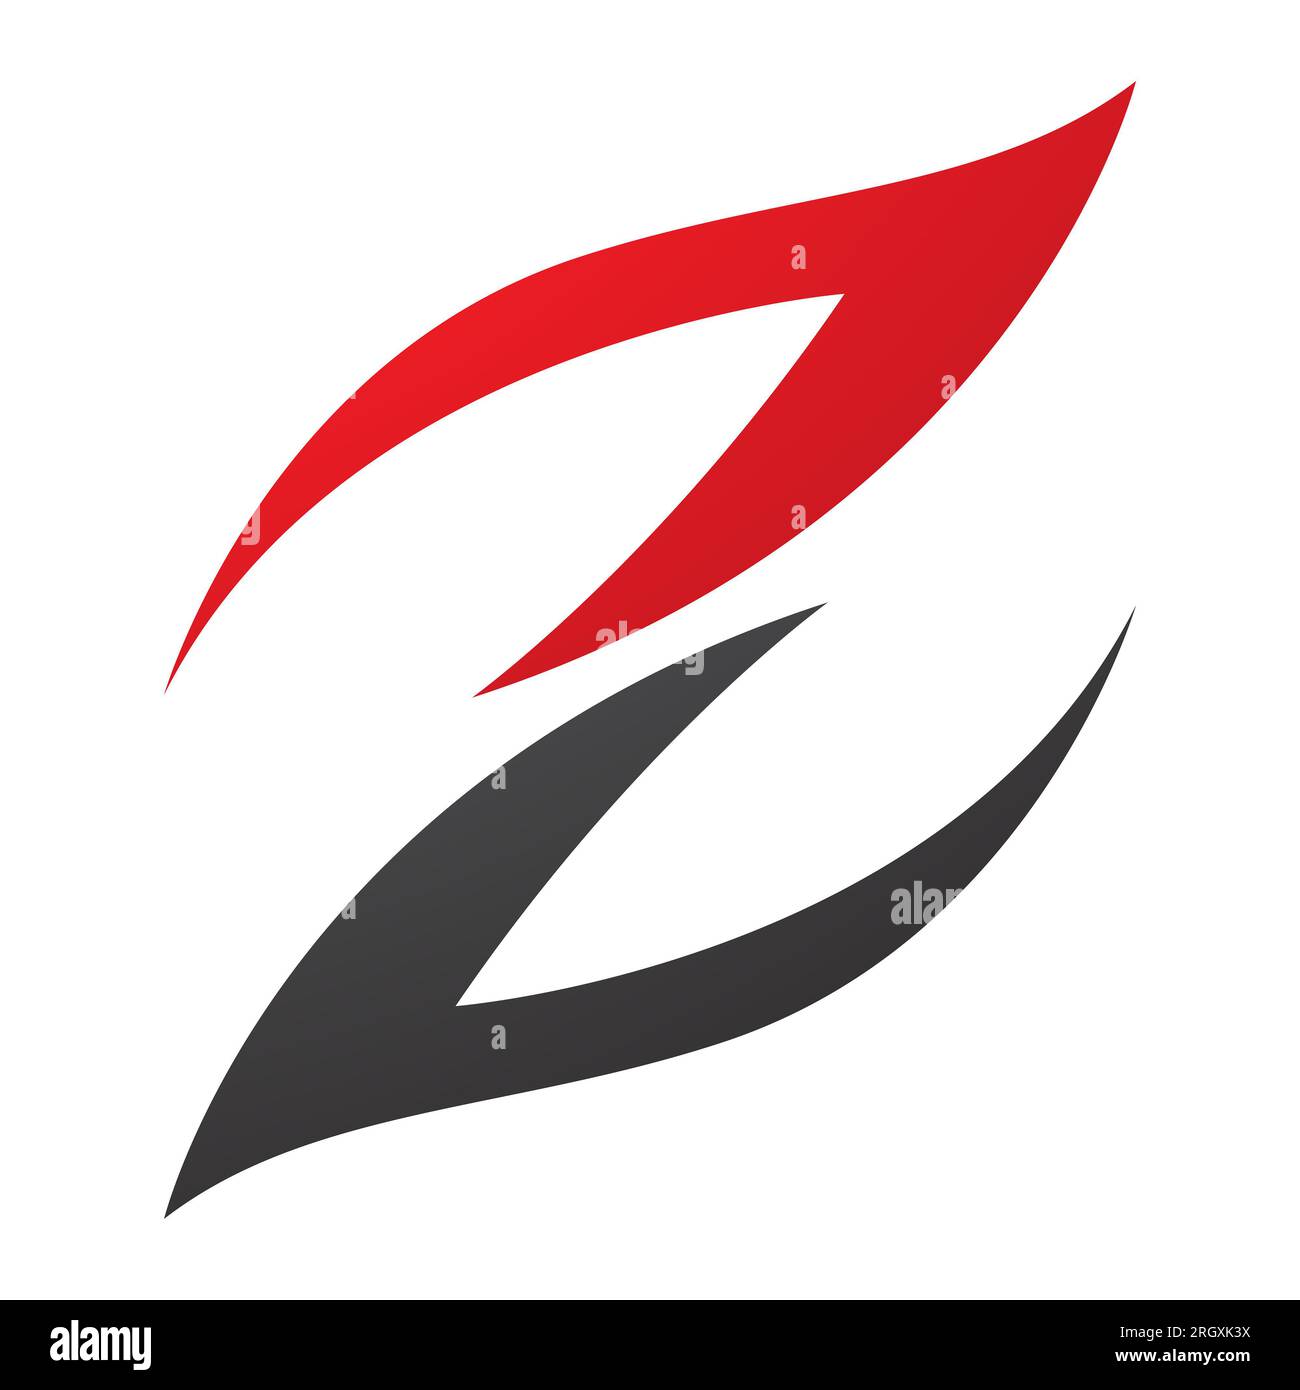 Red and Black Fire Shaped Letter Z Icon on a White Background Stock Photo